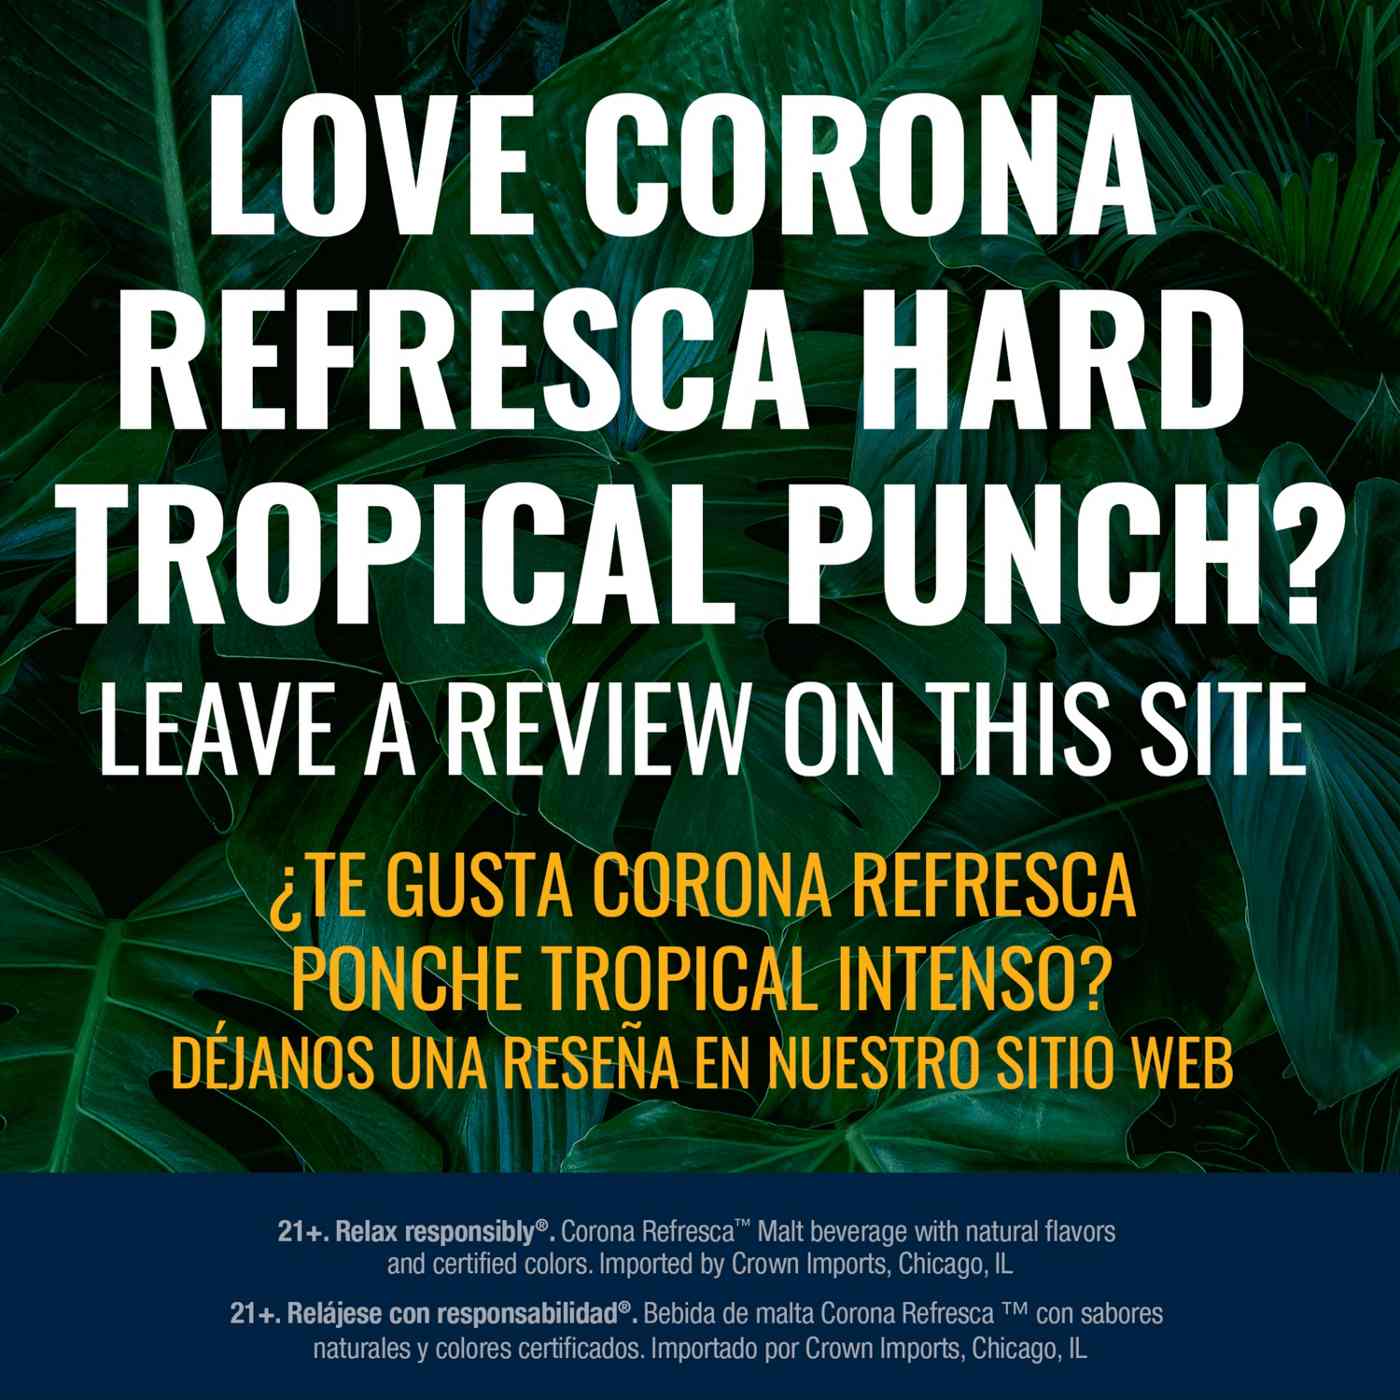 Corona Refresca Hard Tropical Punch Variety Pack 12 oz Cans, 12 pk; image 5 of 10